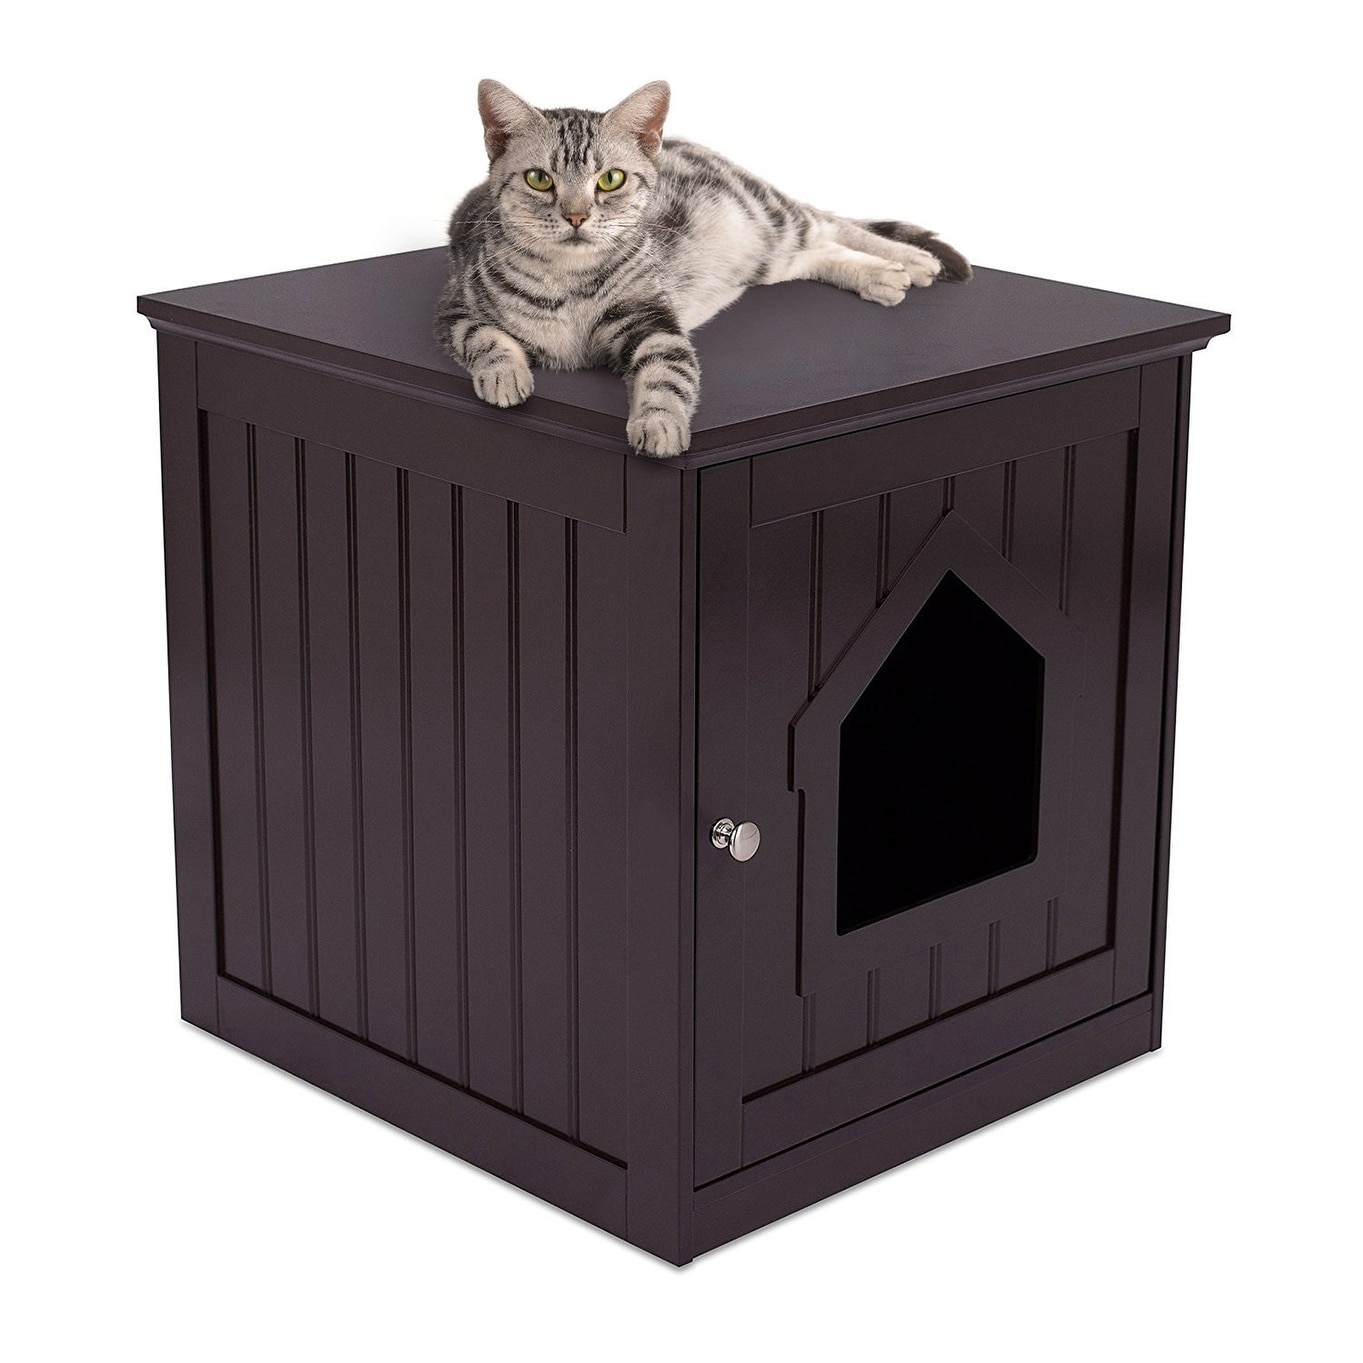 Coffee Ecurson Side Table,Simple Style Multifunctional Cat House Side Table Pet Nightstand Crate Cat Litter Box Bedside Table,for Home,Bedroom,Living Room,20.5 x 19.3 x 25.0 in